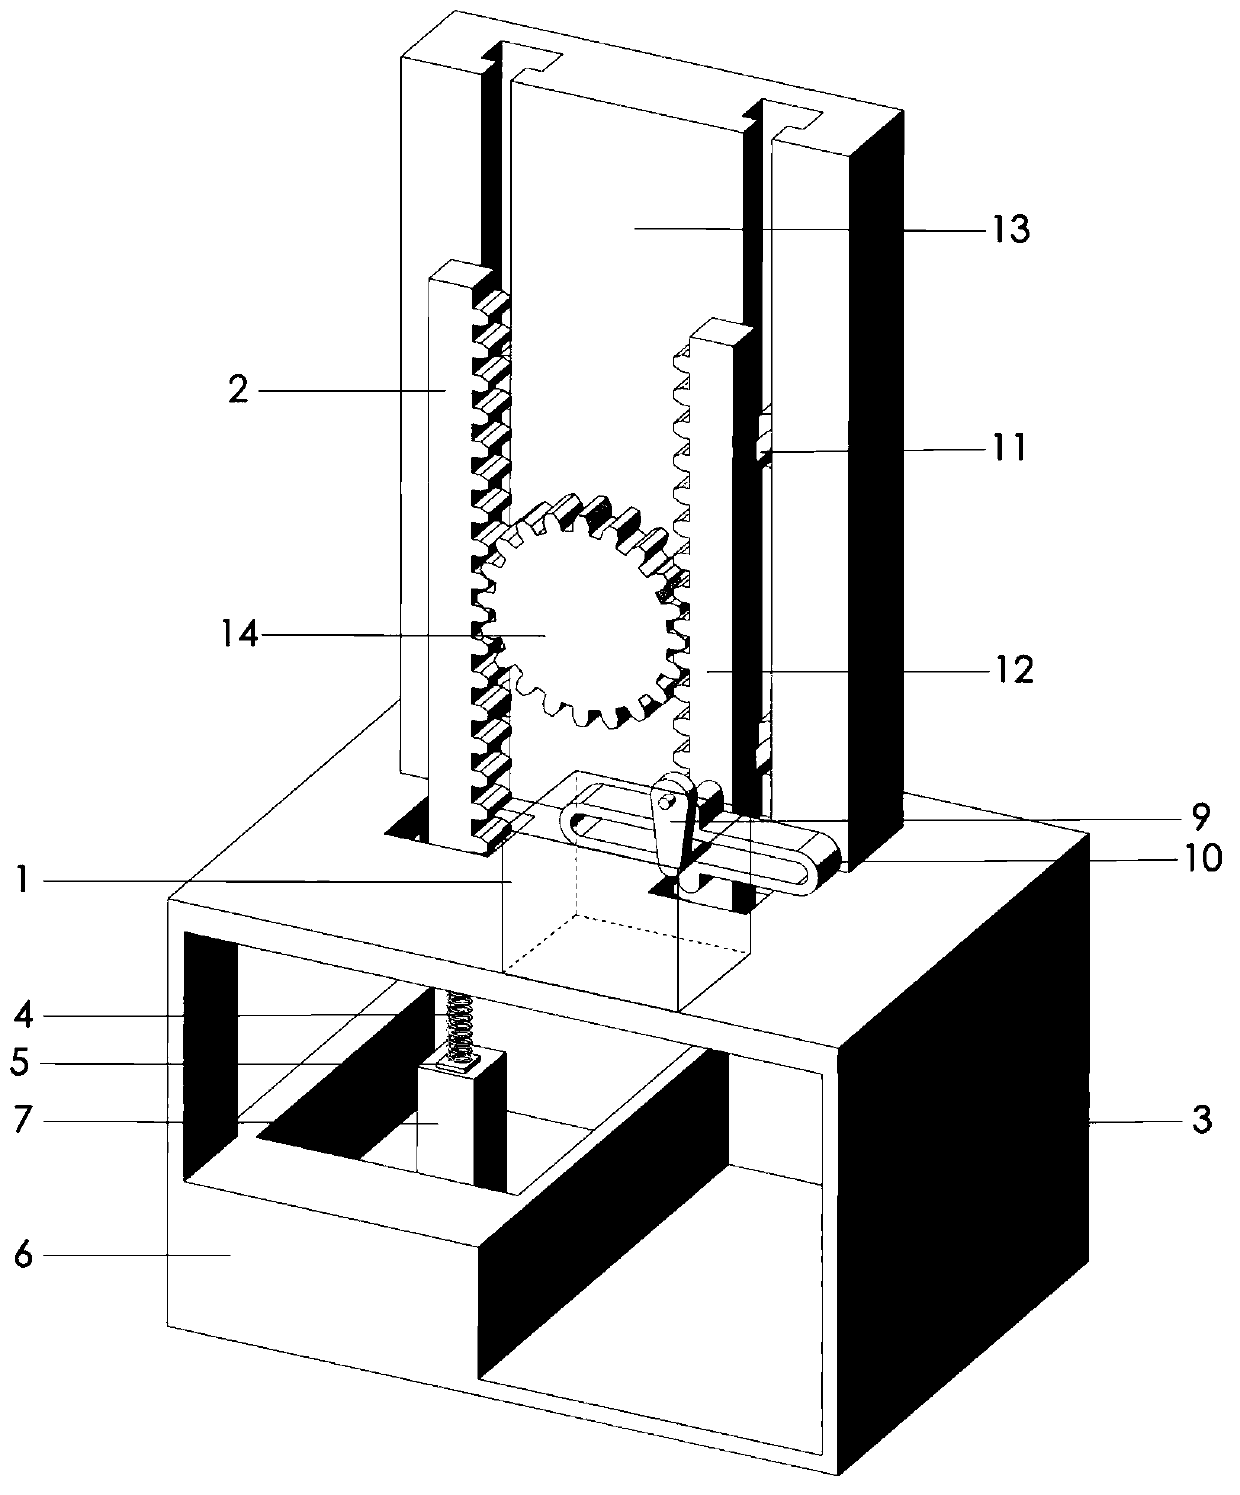 Vertical cyclic load loading test device for oil tank pile foundation settlement test